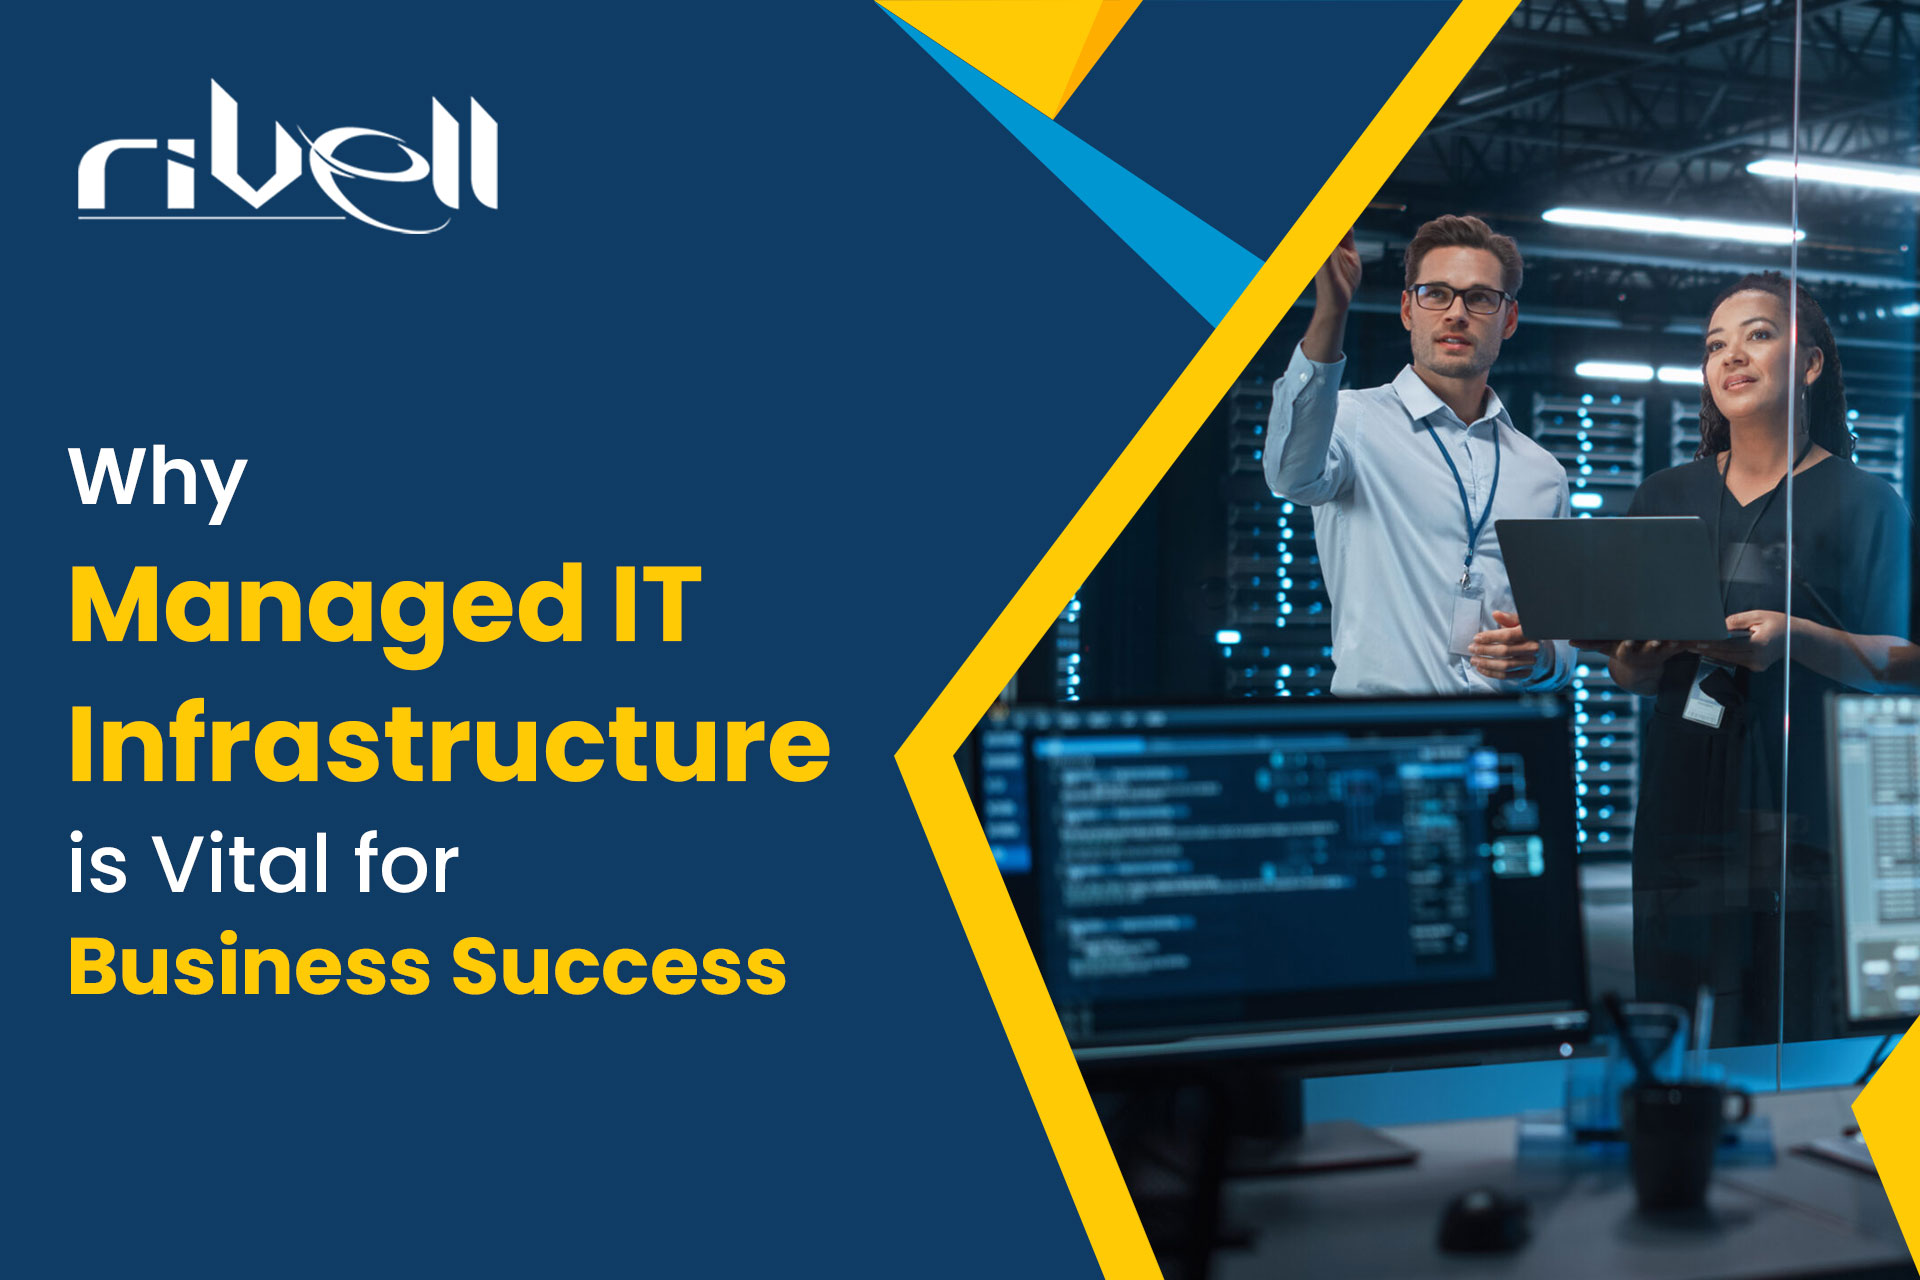 Why Managed IT Infrastructure is Vital for Business Success